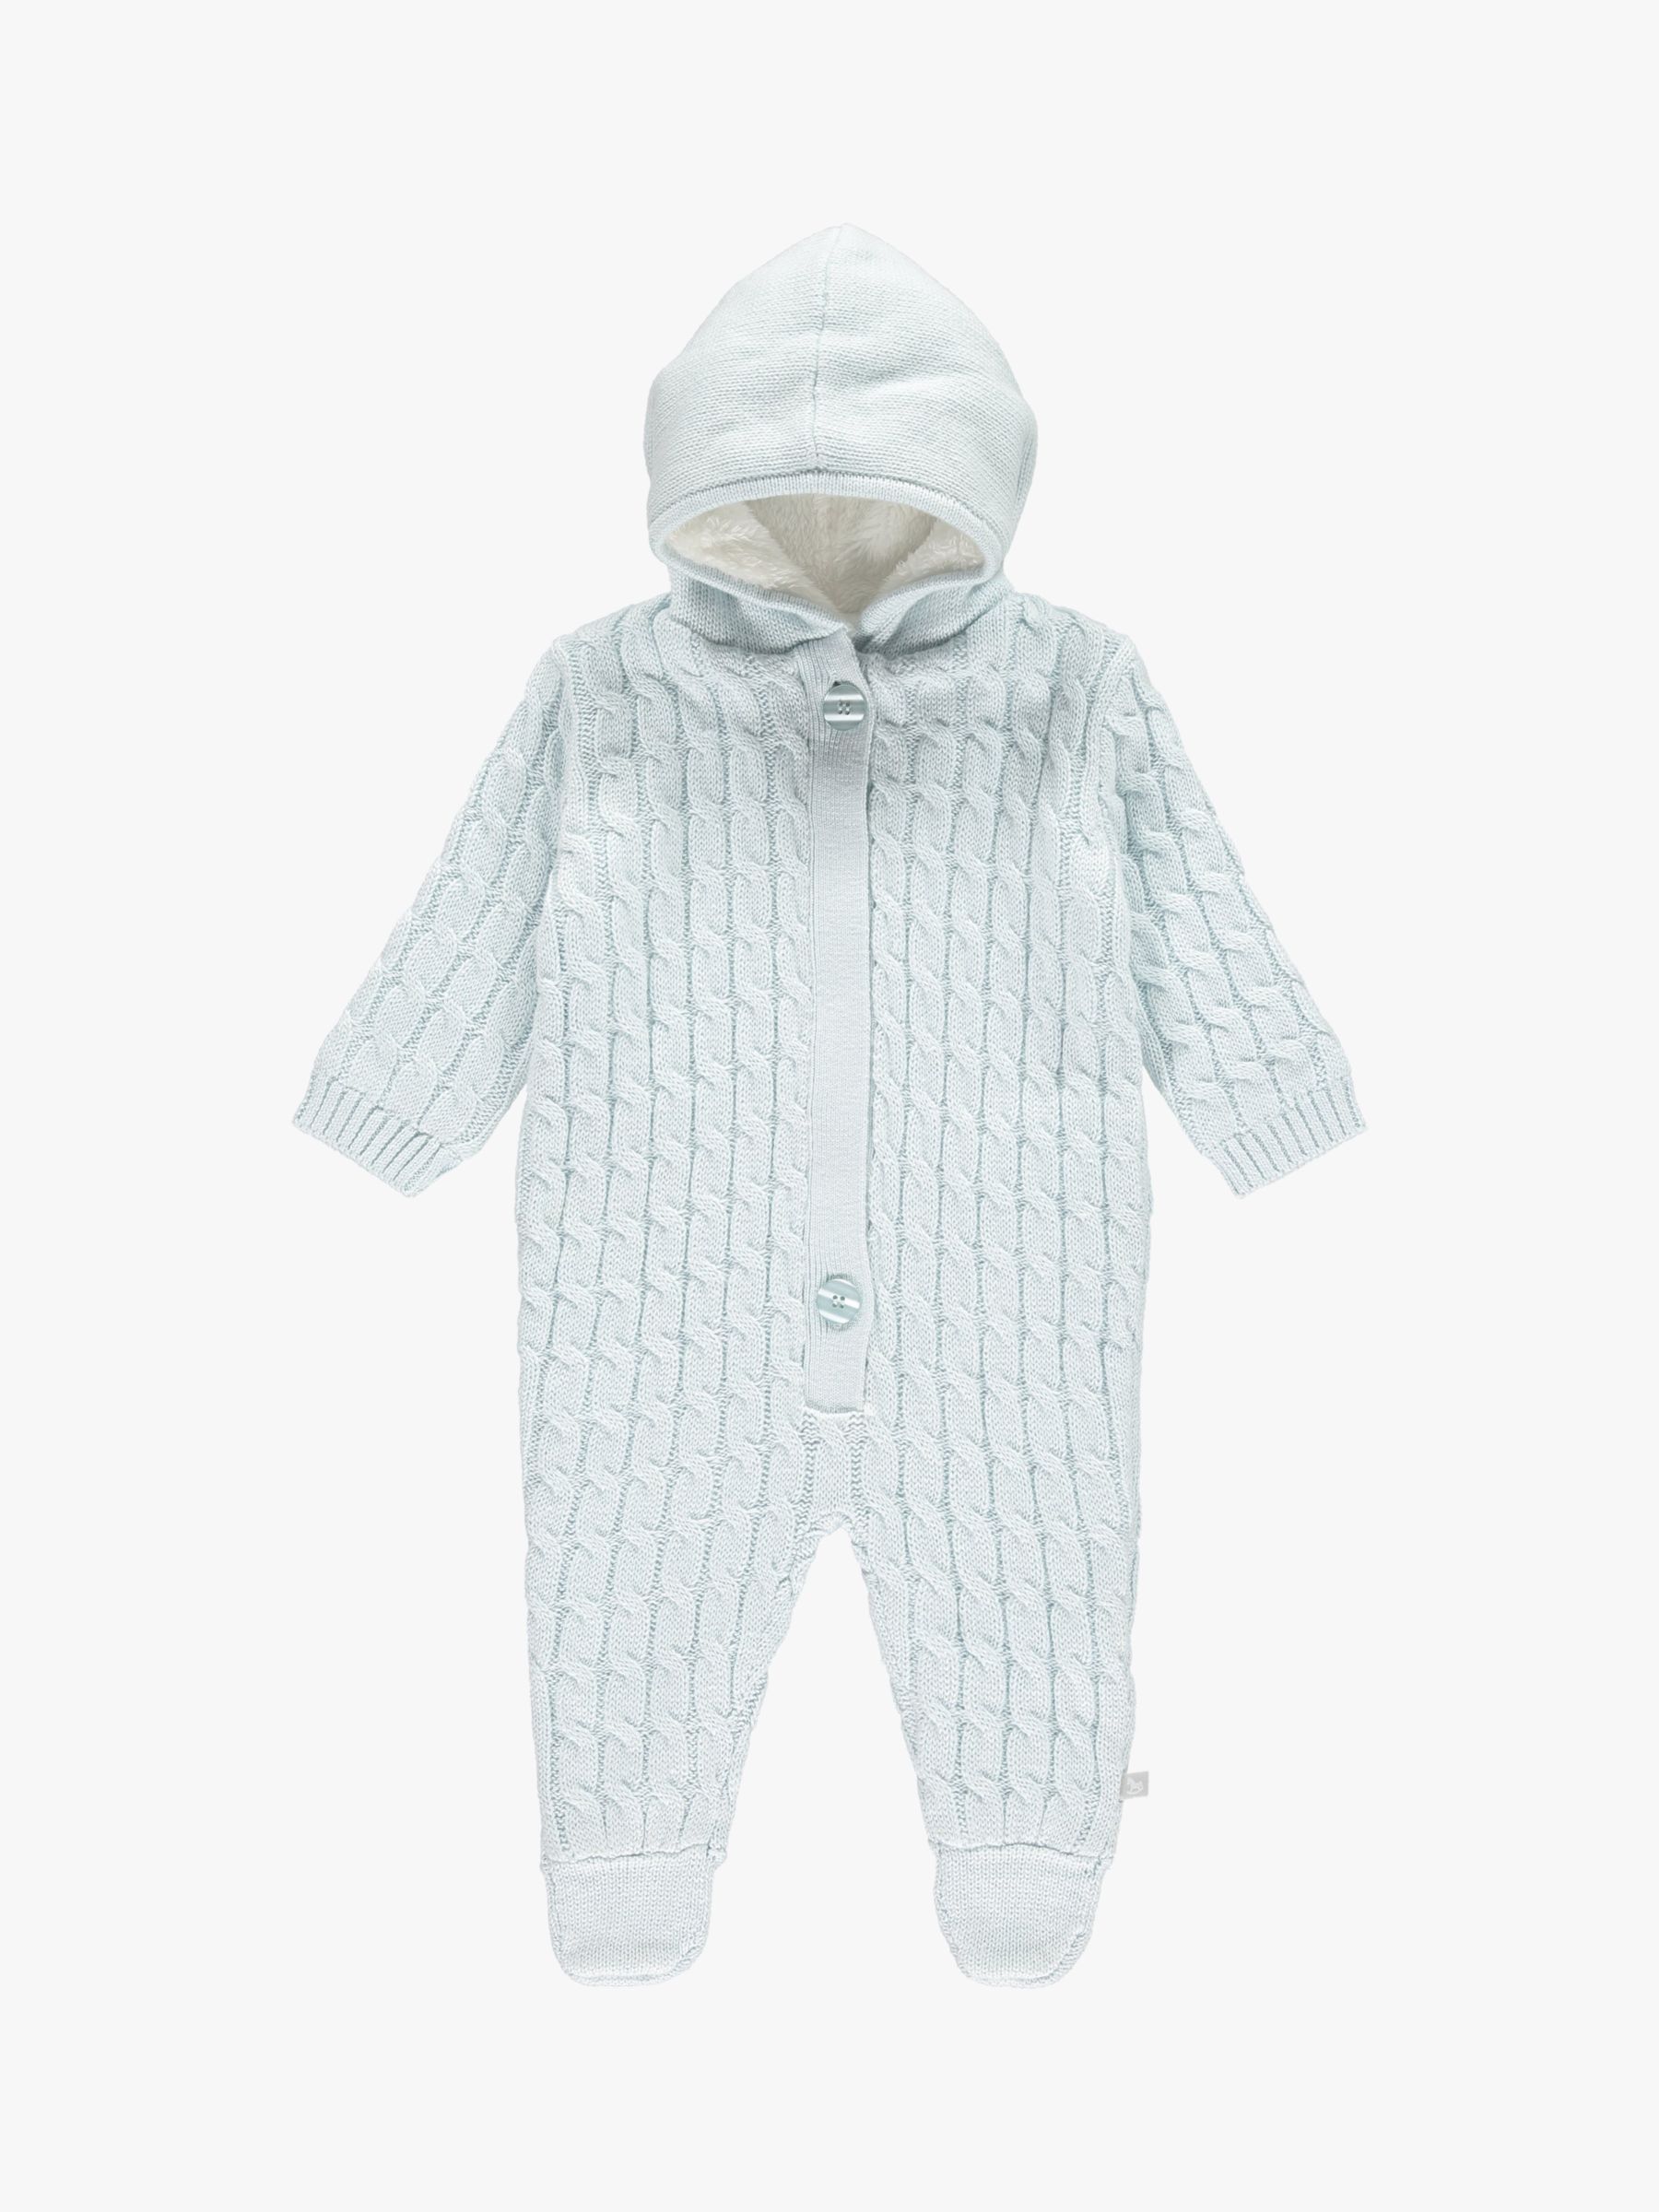 The Little Tailor Baby Knitted Snowsuit, Blue, 0-3 months